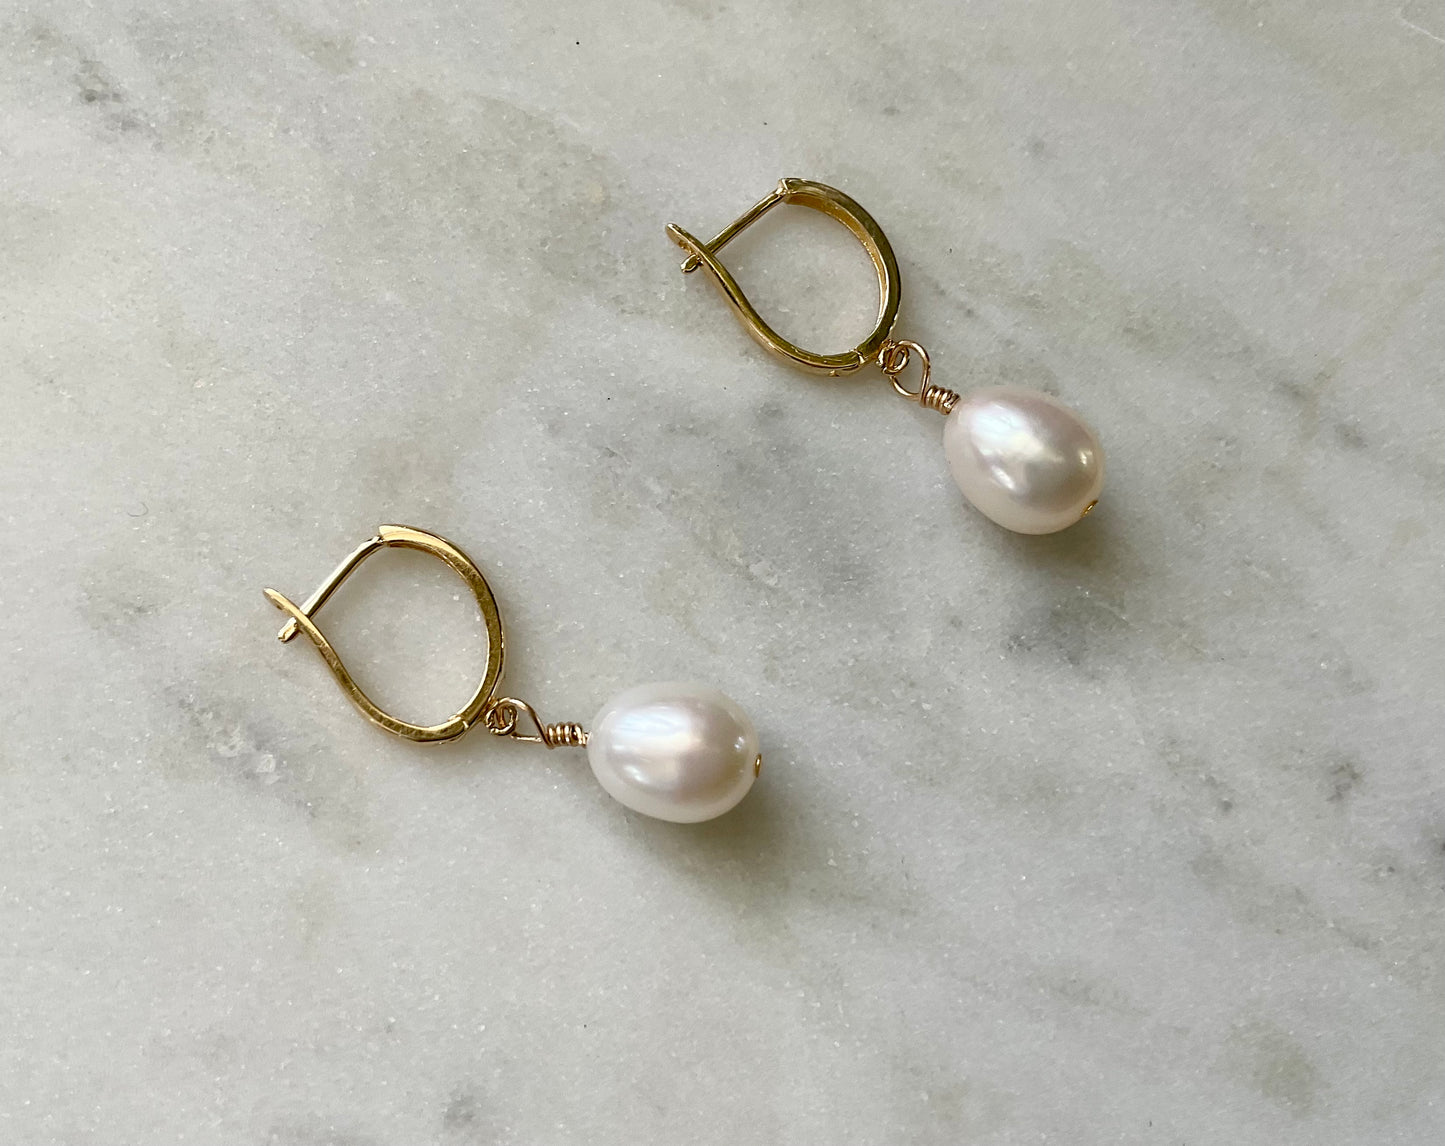 14k Solid Gold Earrings with Pearls